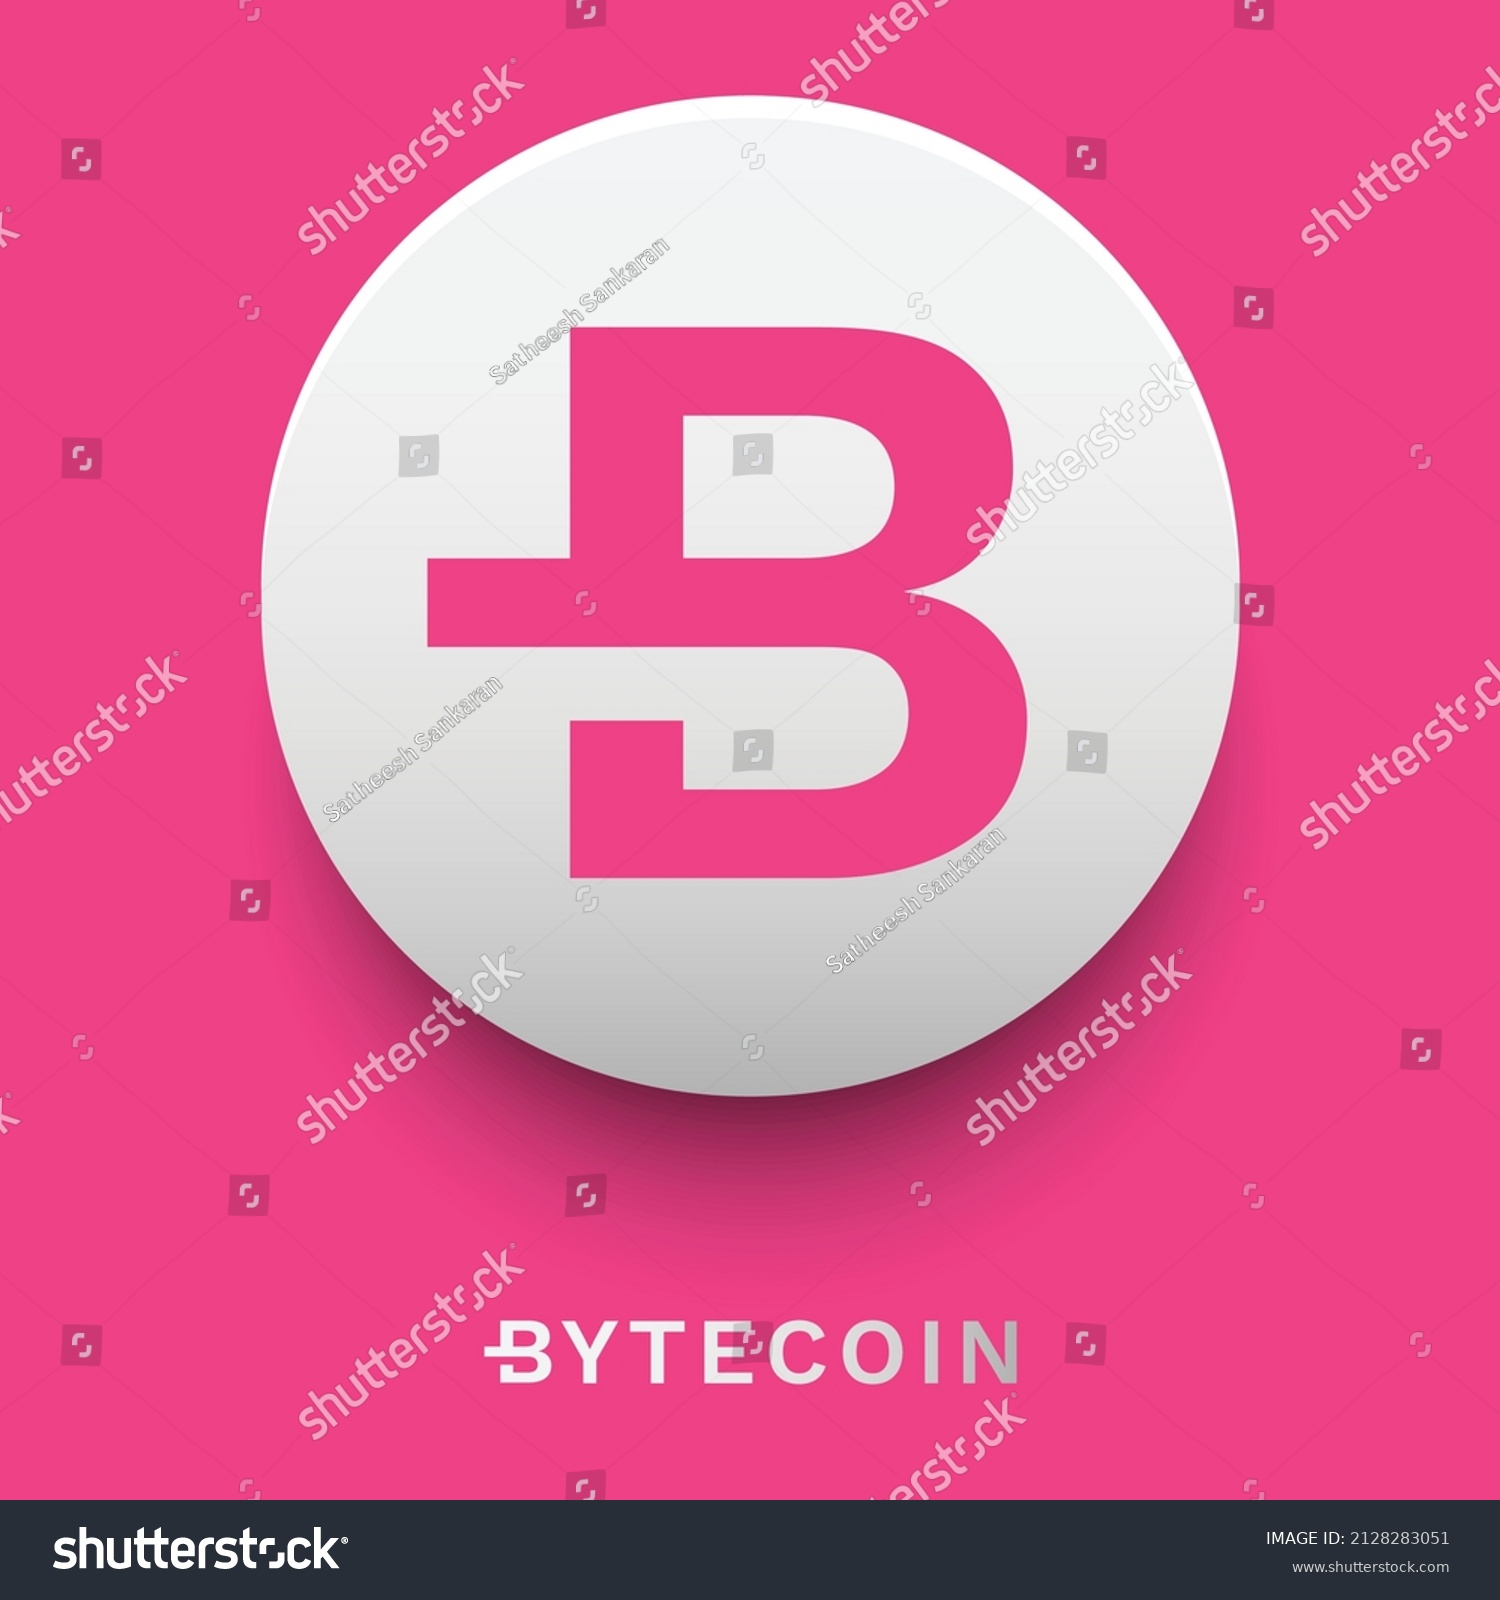 SVG of Bytecoin BCN Crypto currency logo and symbol icons vector template. Can be used as stickers, badges, buttons and emblems for virtual digital money technology concept svg